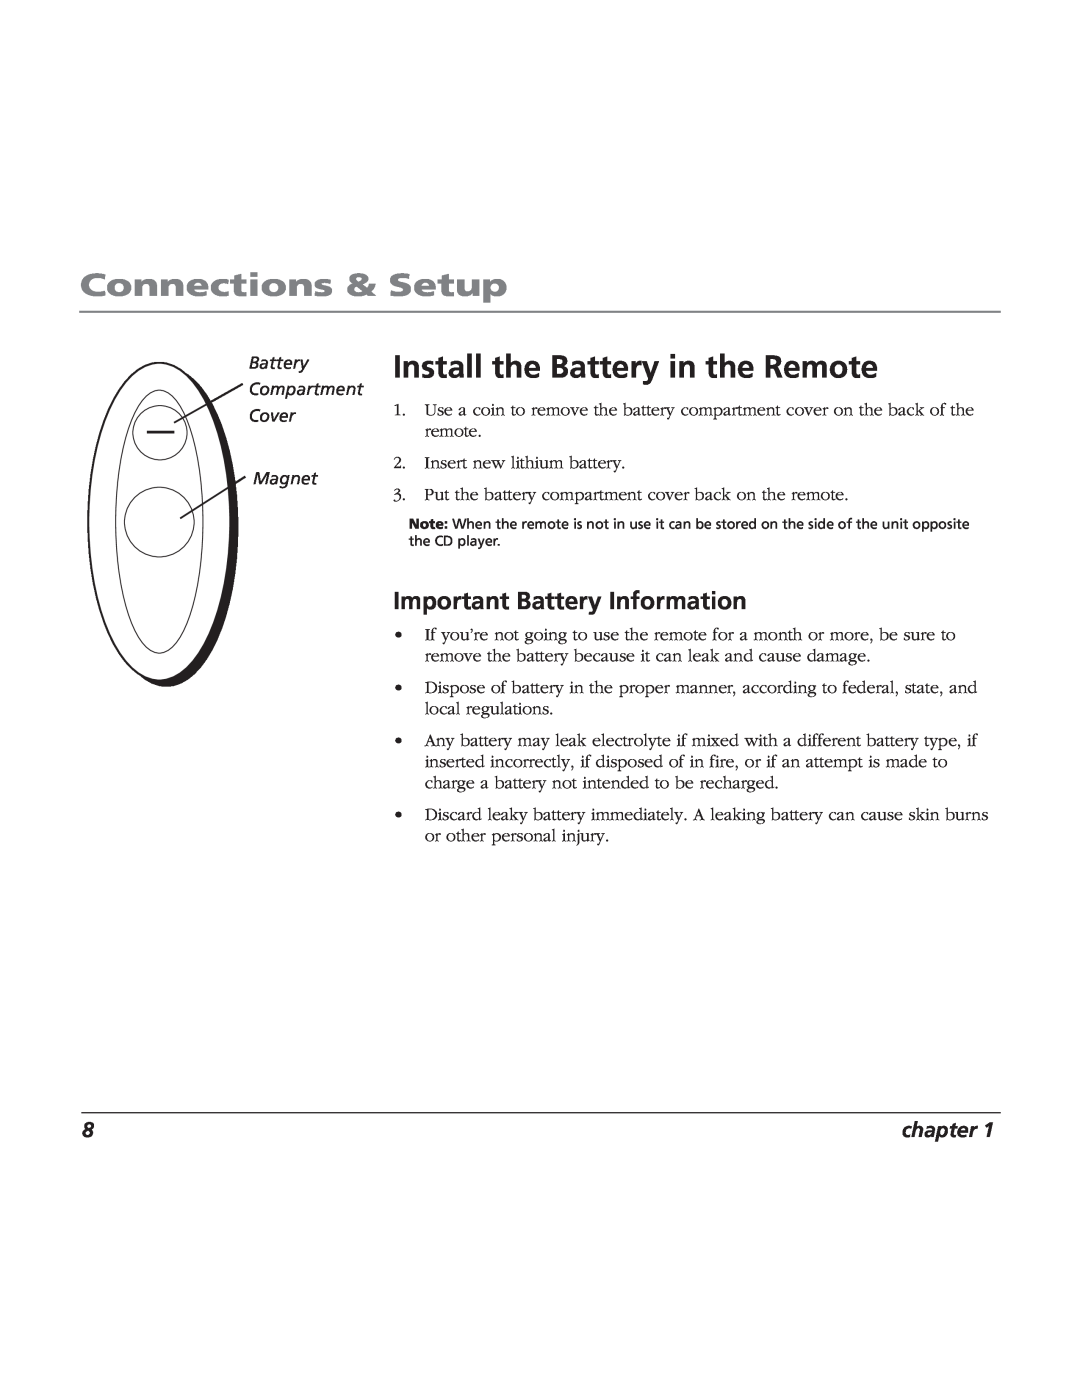 RCA BLC524 Install the Battery in the Remote, Important Battery Information, Compartment, Cover, Magnet, chapter 